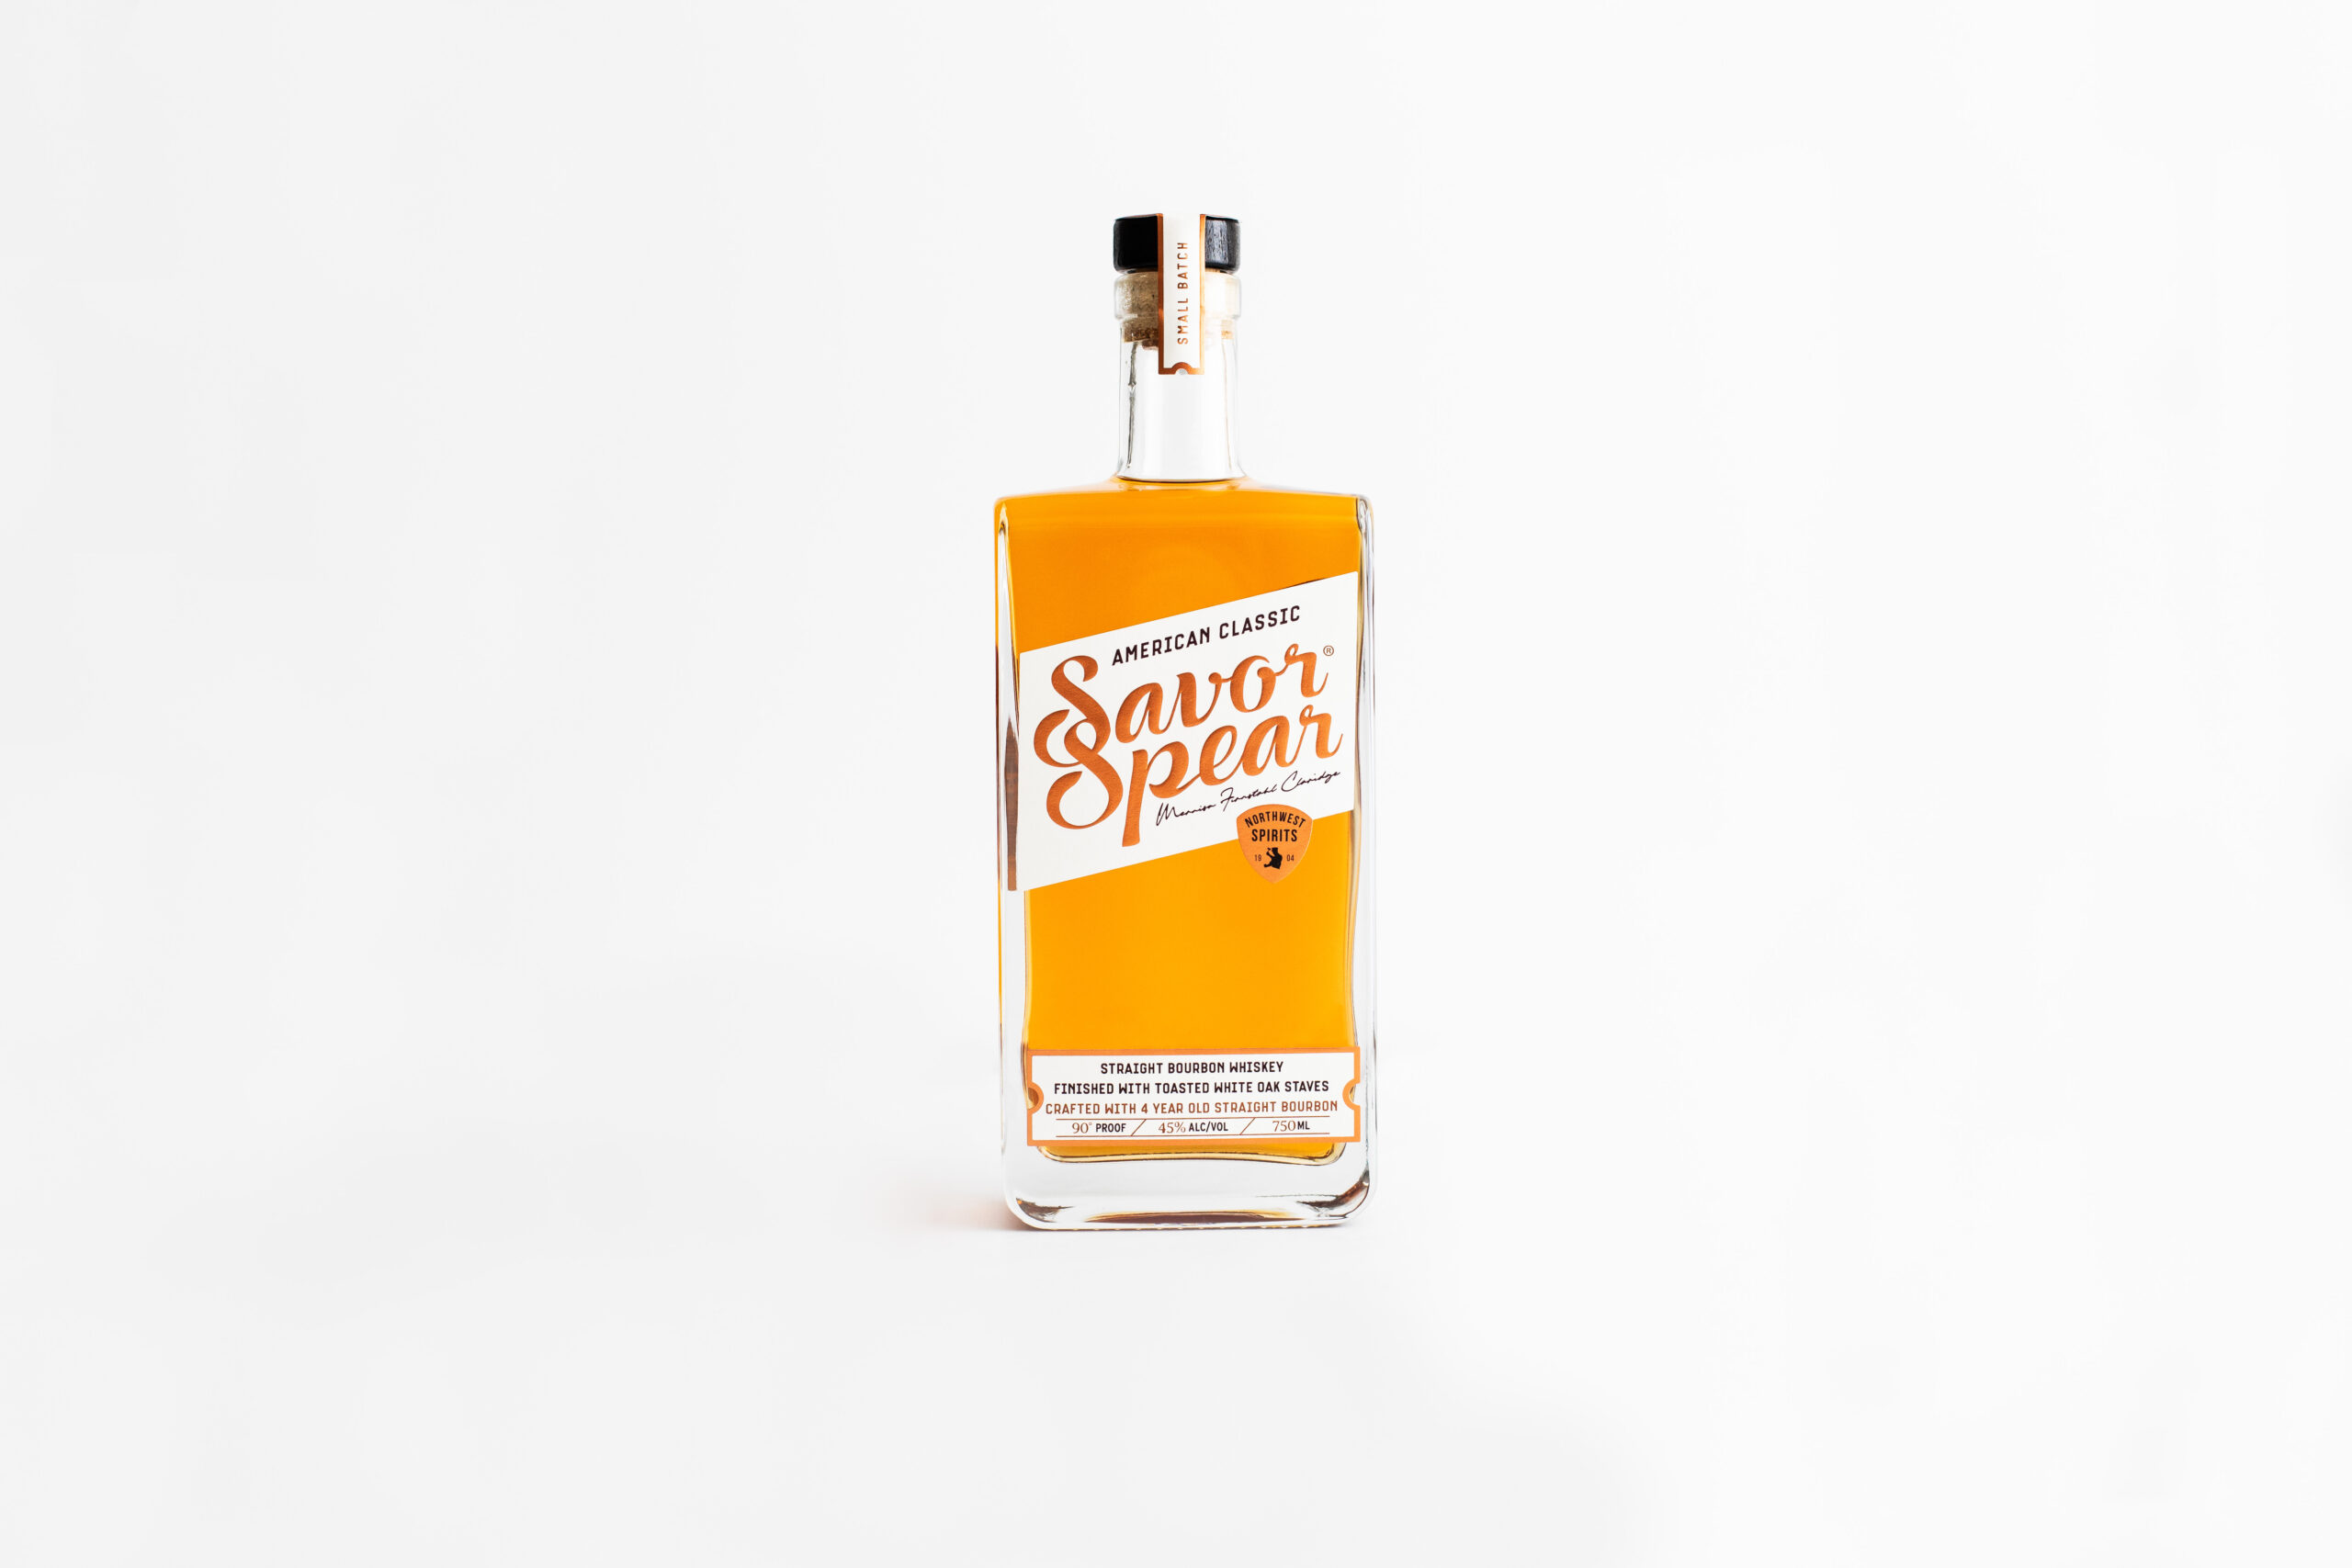 A bottle of Savor Spear Classic American Bourbon sits on a clean white backdrop